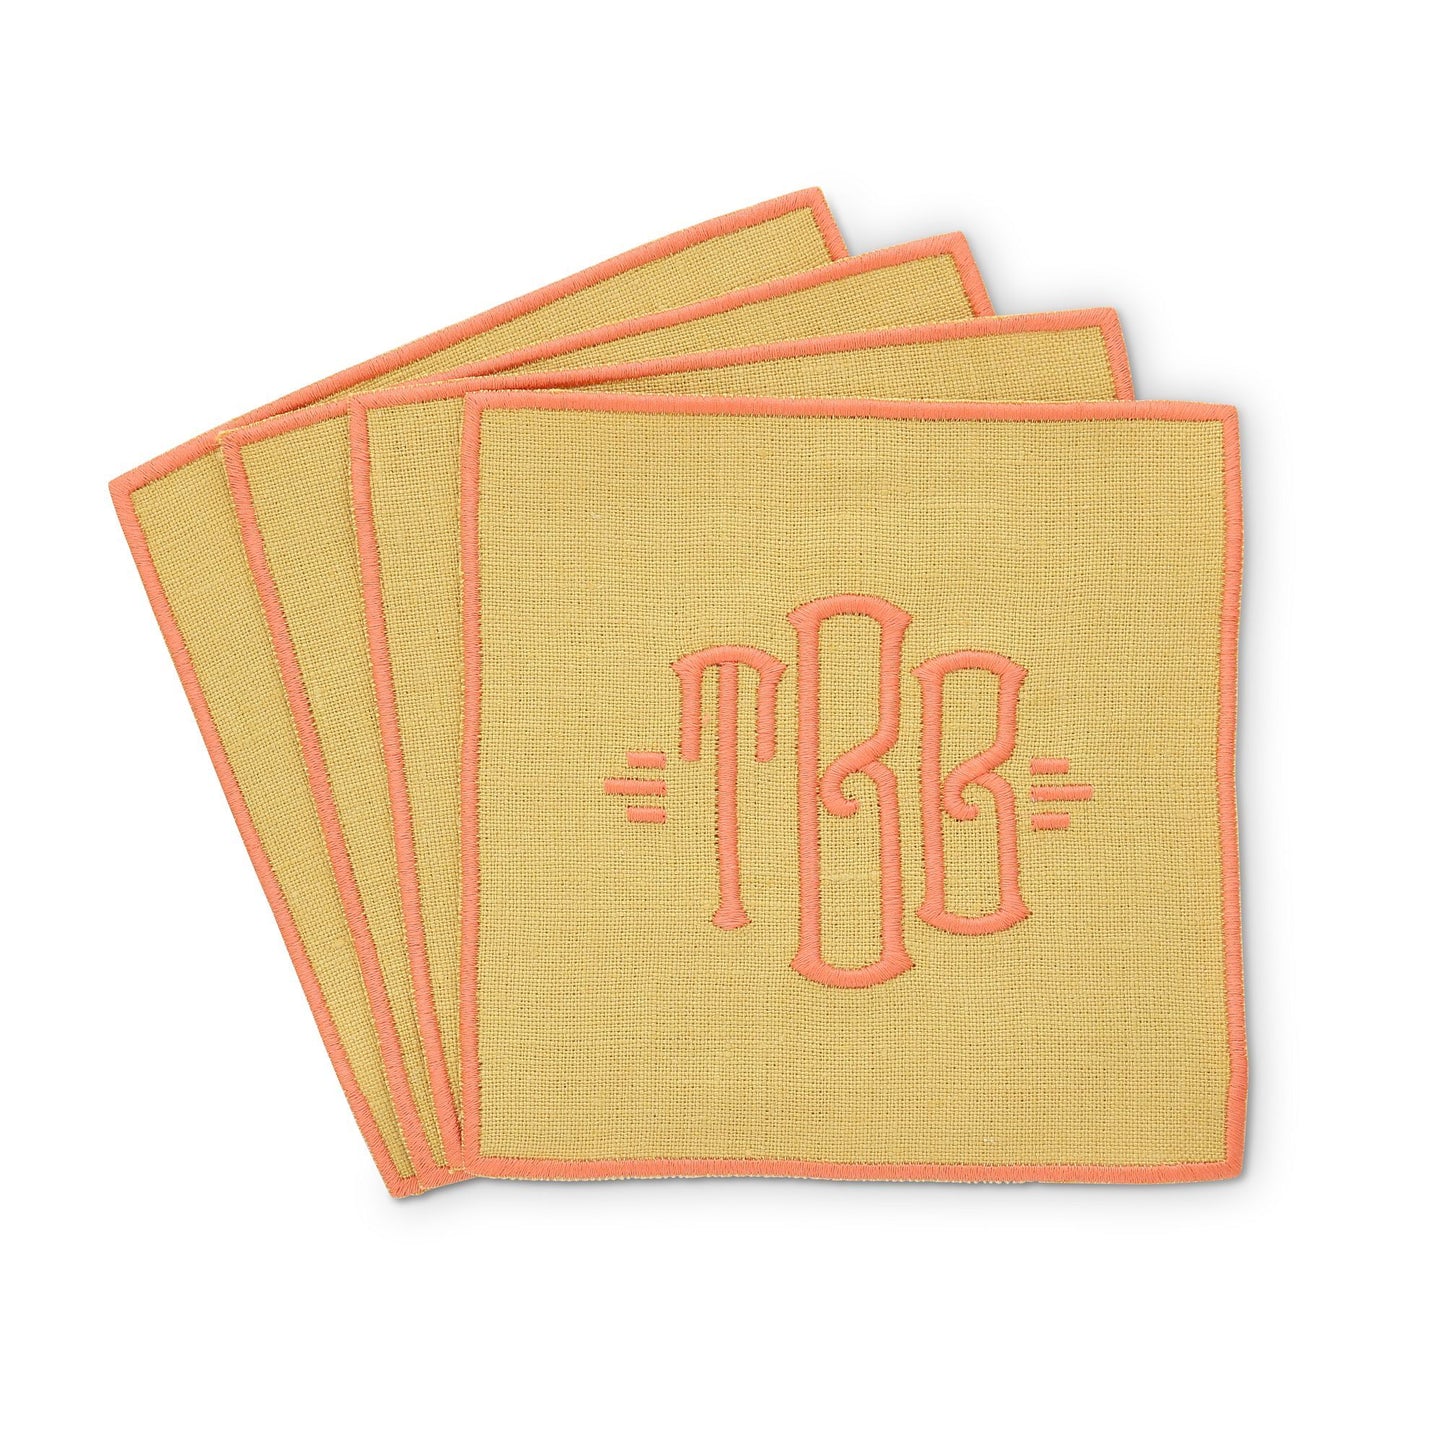 Made to order Turin Linen Cocktail Napkins (set of 4)